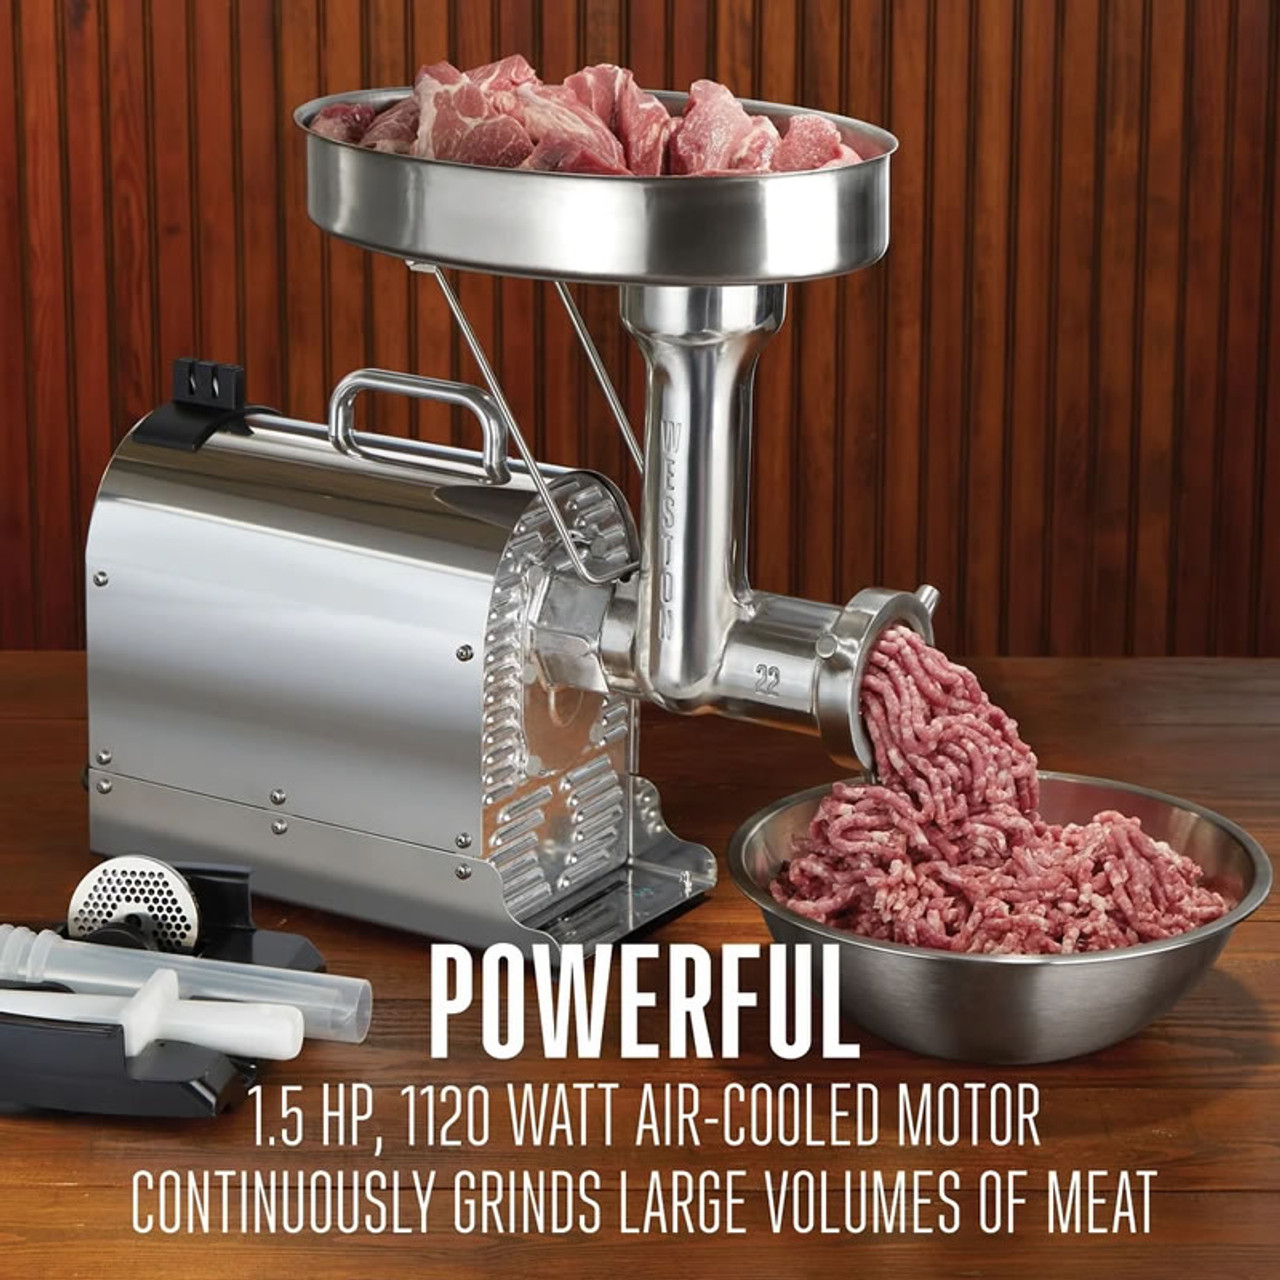 https://cdn11.bigcommerce.com/s-3n1nnt5qyw/images/stencil/1280x1280/products/31210/34392/weston-new-pro-series-22-stainless-steel-meat-grinder-sausage-stuffer-1-5-hp-model-10-2201-w-40__82853.1686836265.jpg?c=1?imbypass=on